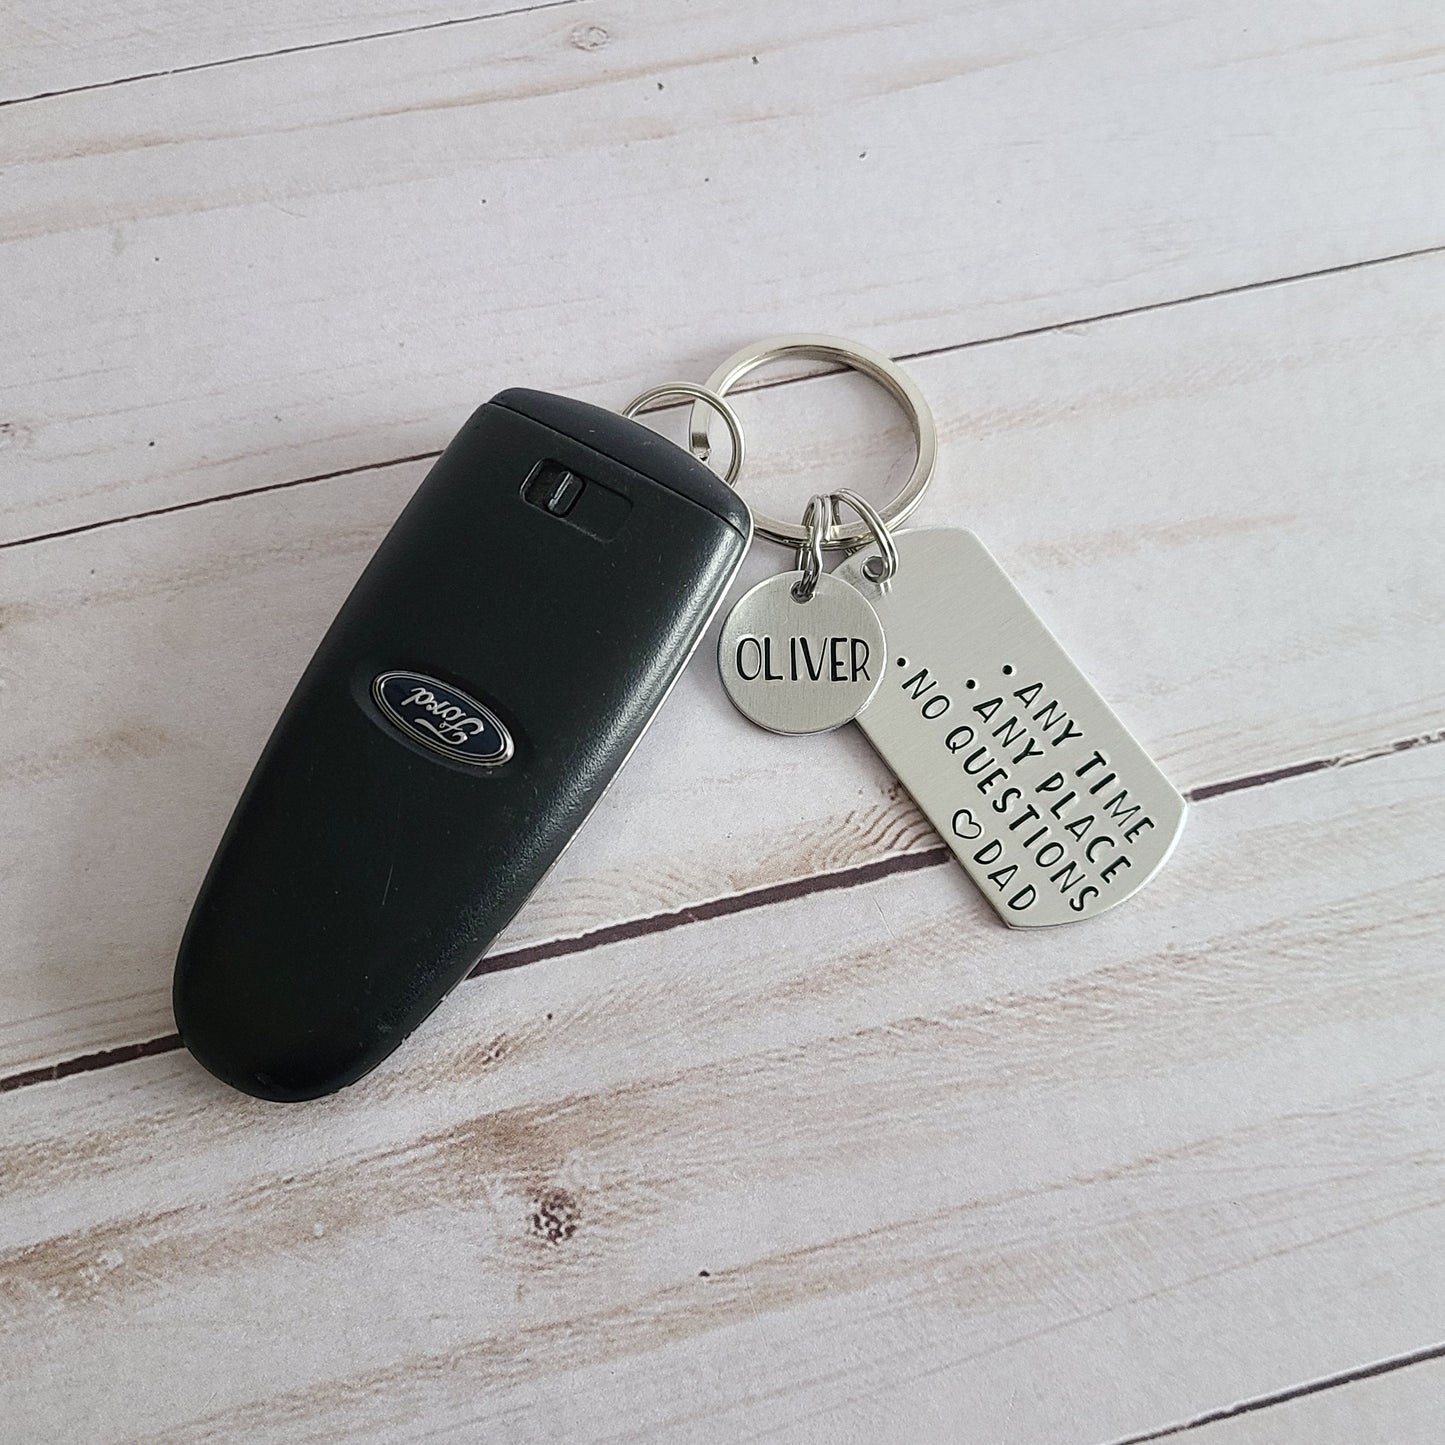 Any Time Any Place No Questions Love Dad Key Chain - Keychains for Teenagers - Gift for New Driver - Cute Personalized Accessories for Teens - Sweet 16 Birthday Gift for Son or Daughter